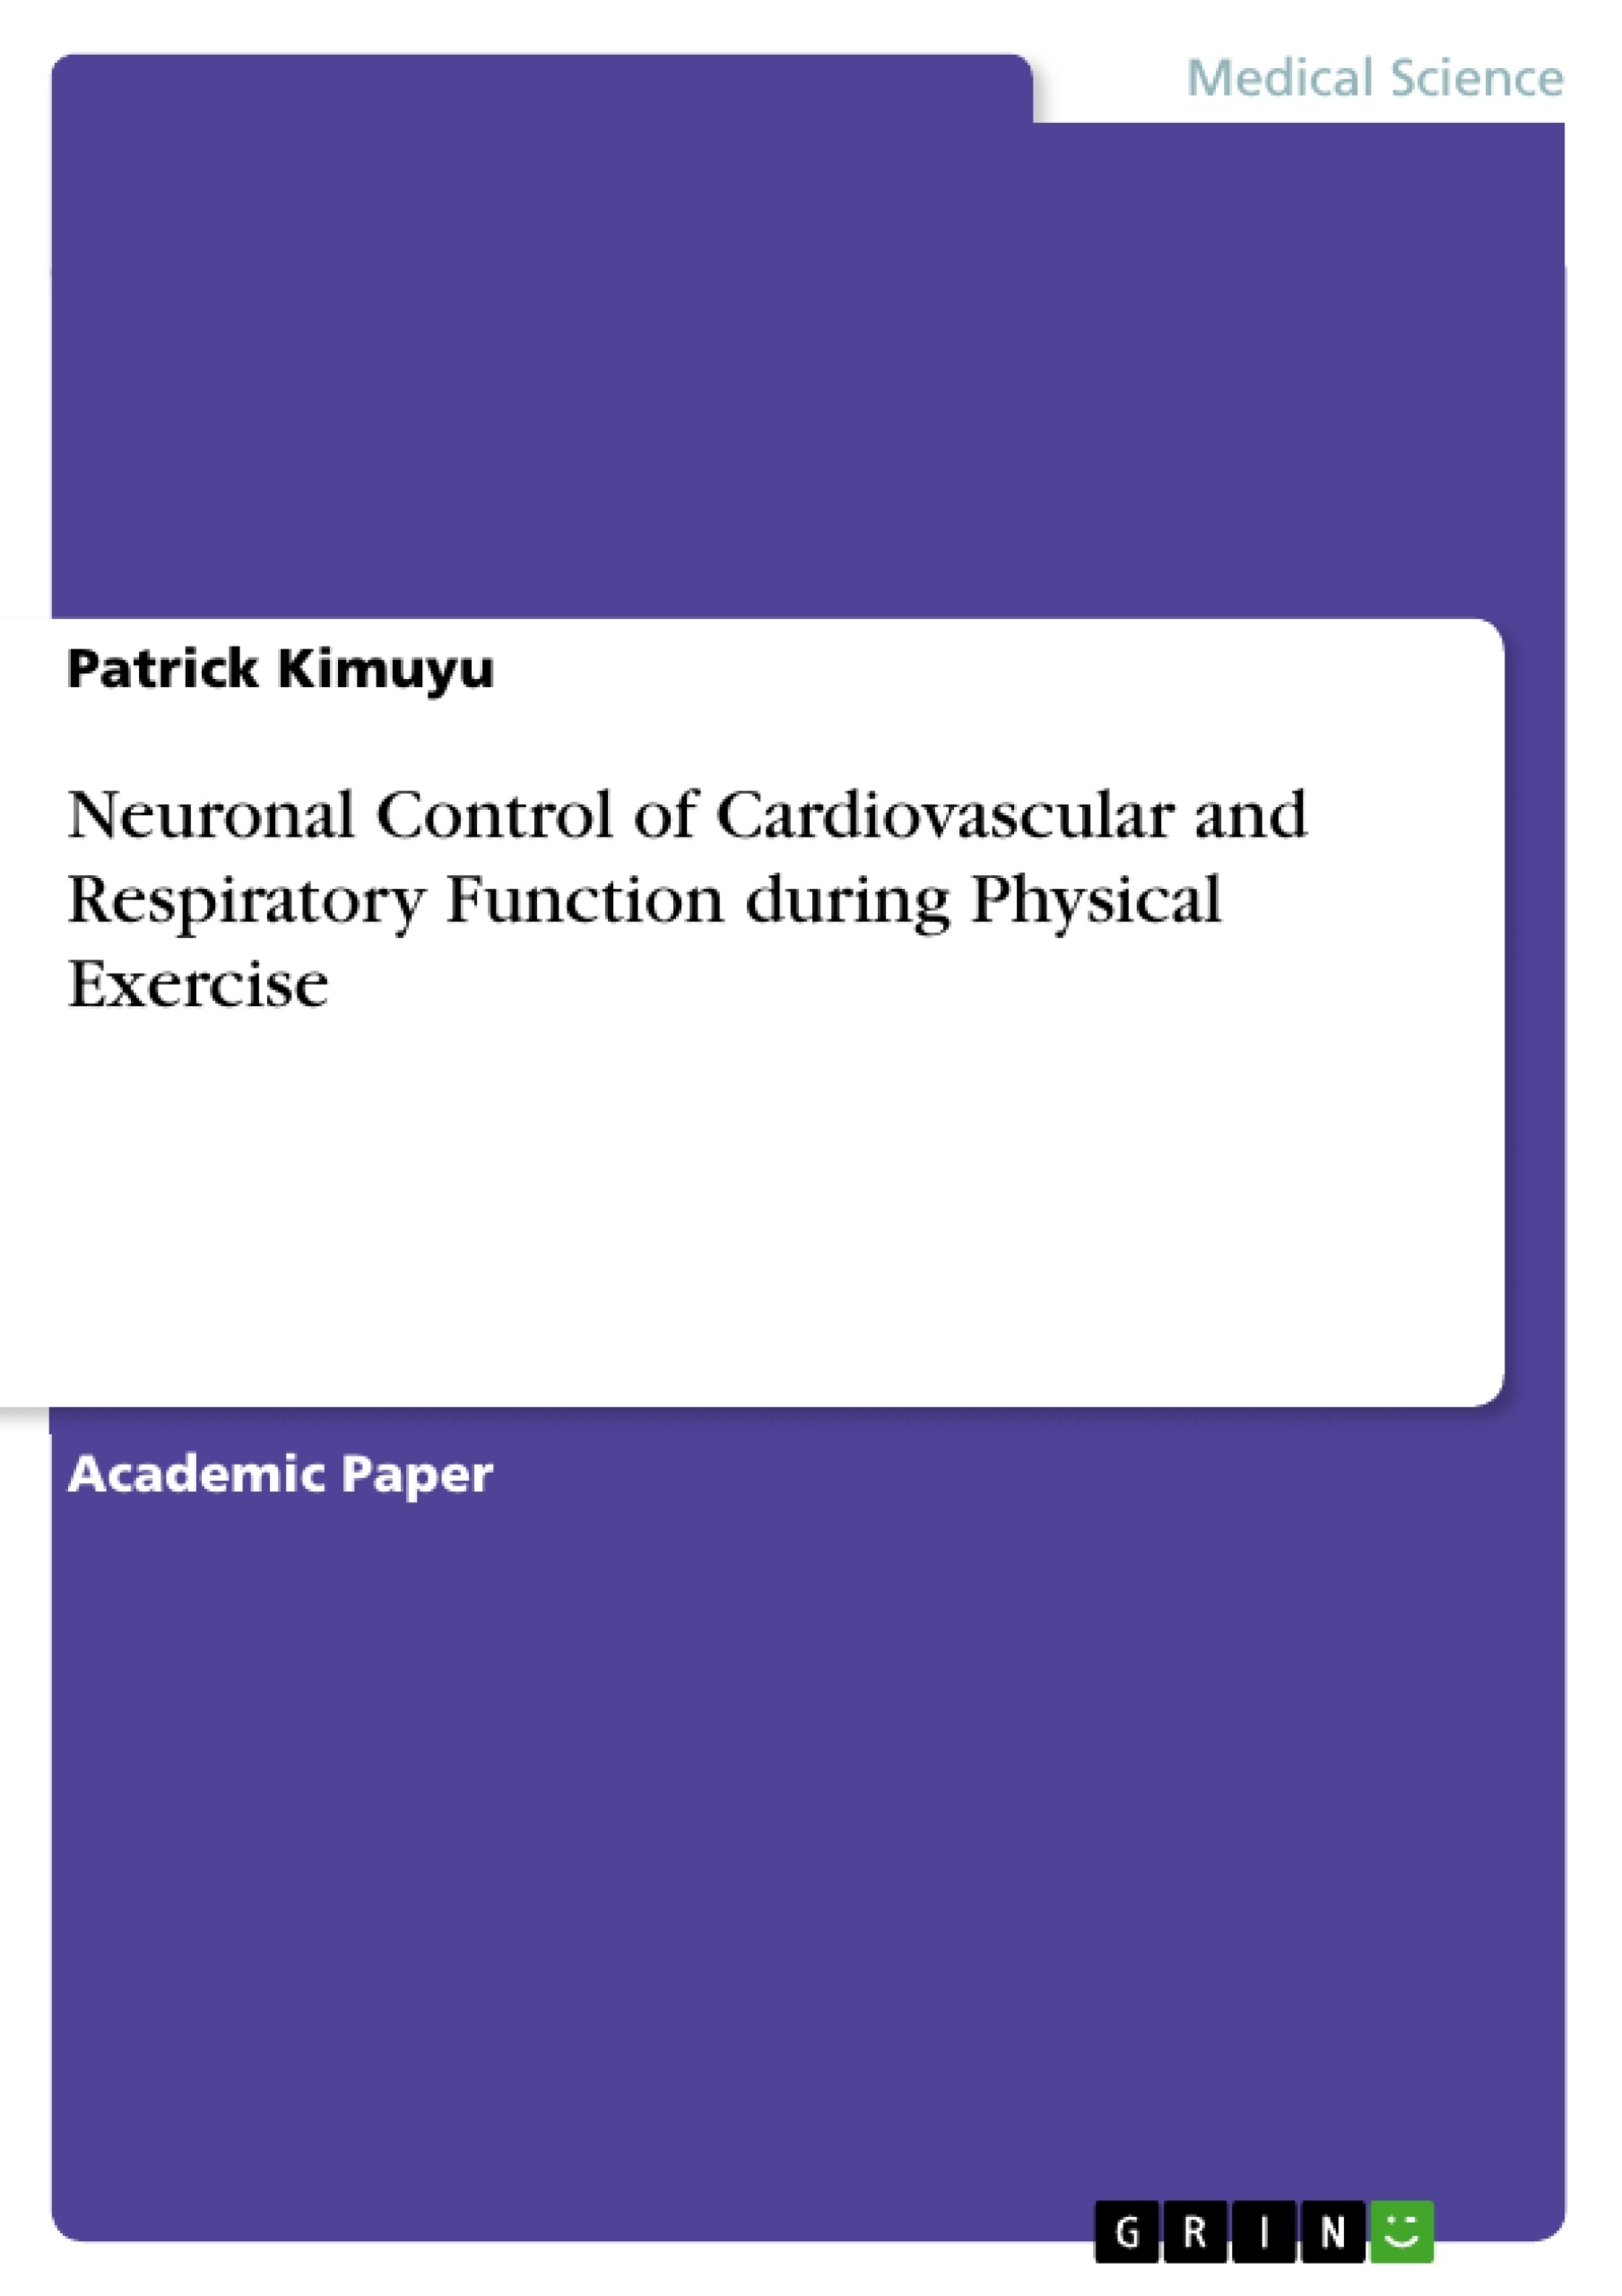 Titre: Neuronal Control of Cardiovascular and Respiratory Function during Physical Exercise